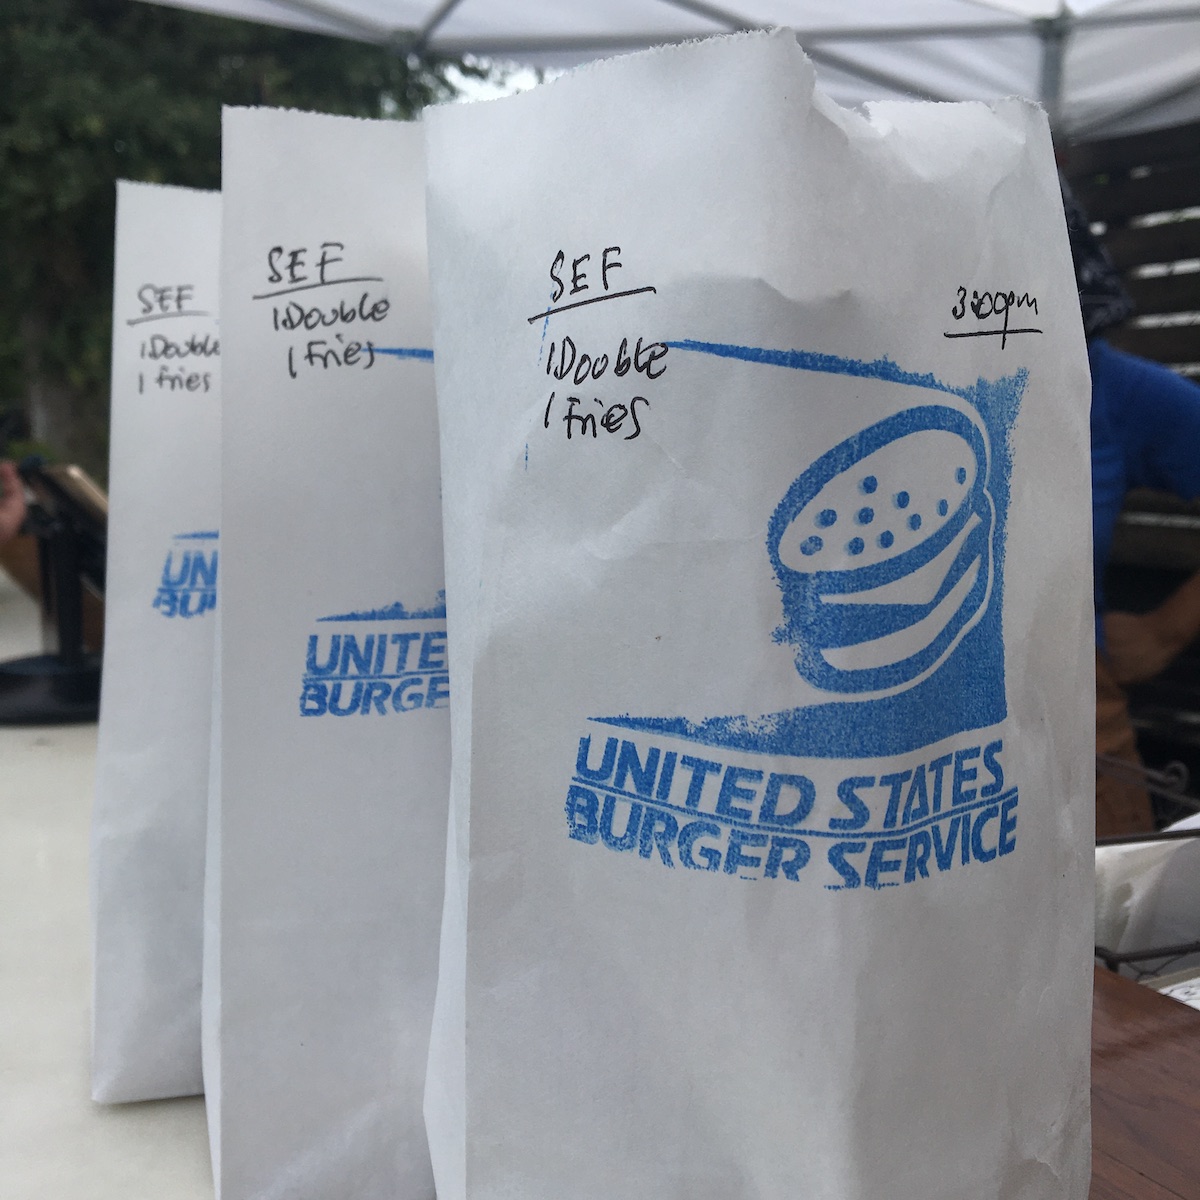 Bags of Burgers from USBS at the Citadel Food Hall in Miami, Florida